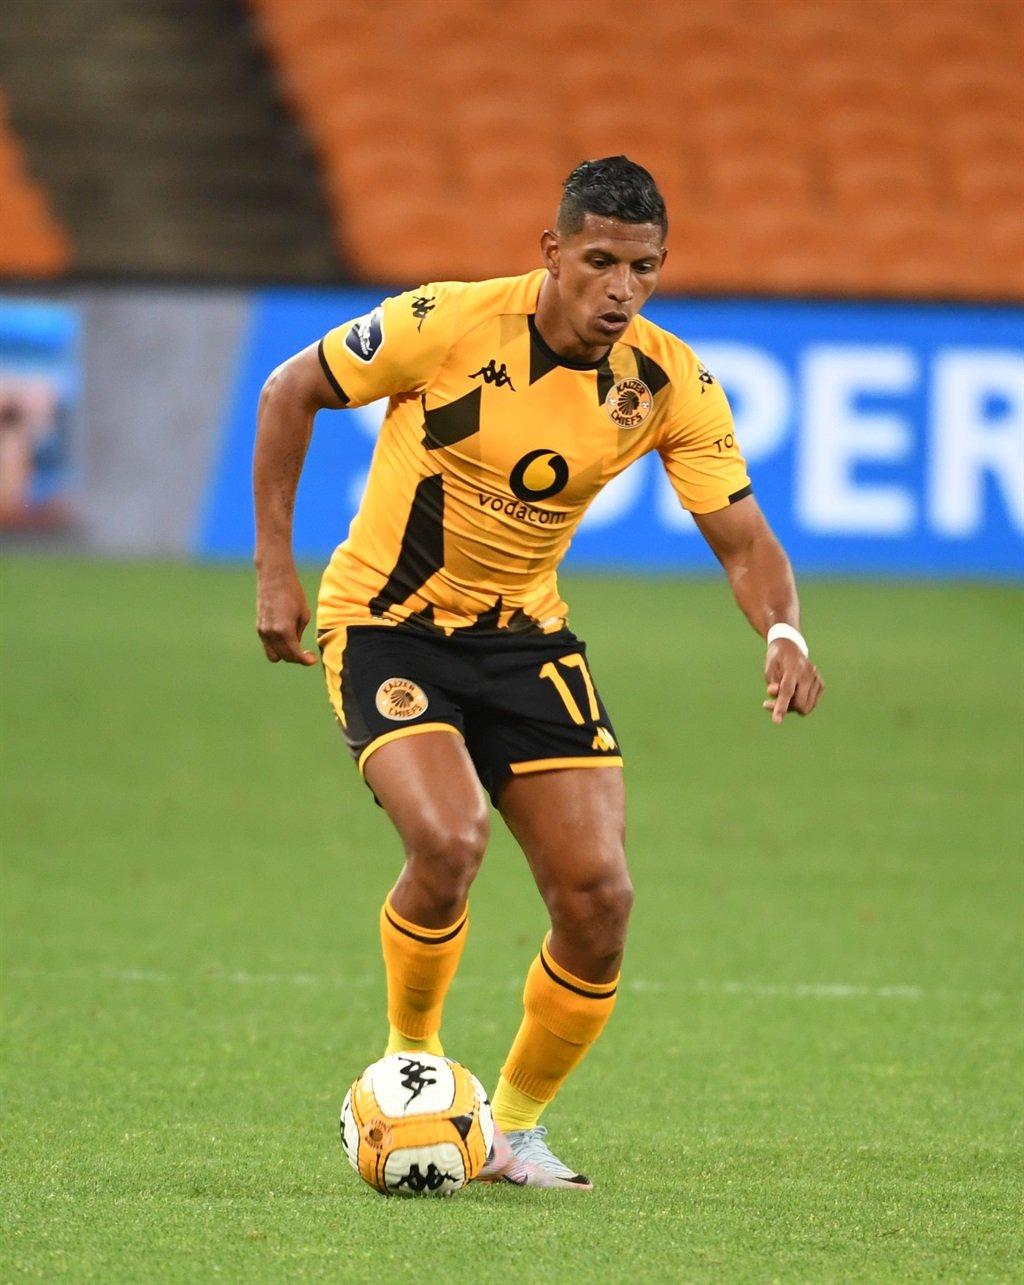 JOHANNESBURG, SOUTH AFRICA - NOVEMBER 08: Edson Castillo of Kaizer Chiefs during the DStv Premiership match between Kaizer Chiefs and Cape Town Spurs at FNB Stadium on November 08, 2023 in Johannesburg, South Africa. (Photo by Lee Warren/Gallo Images),ôB